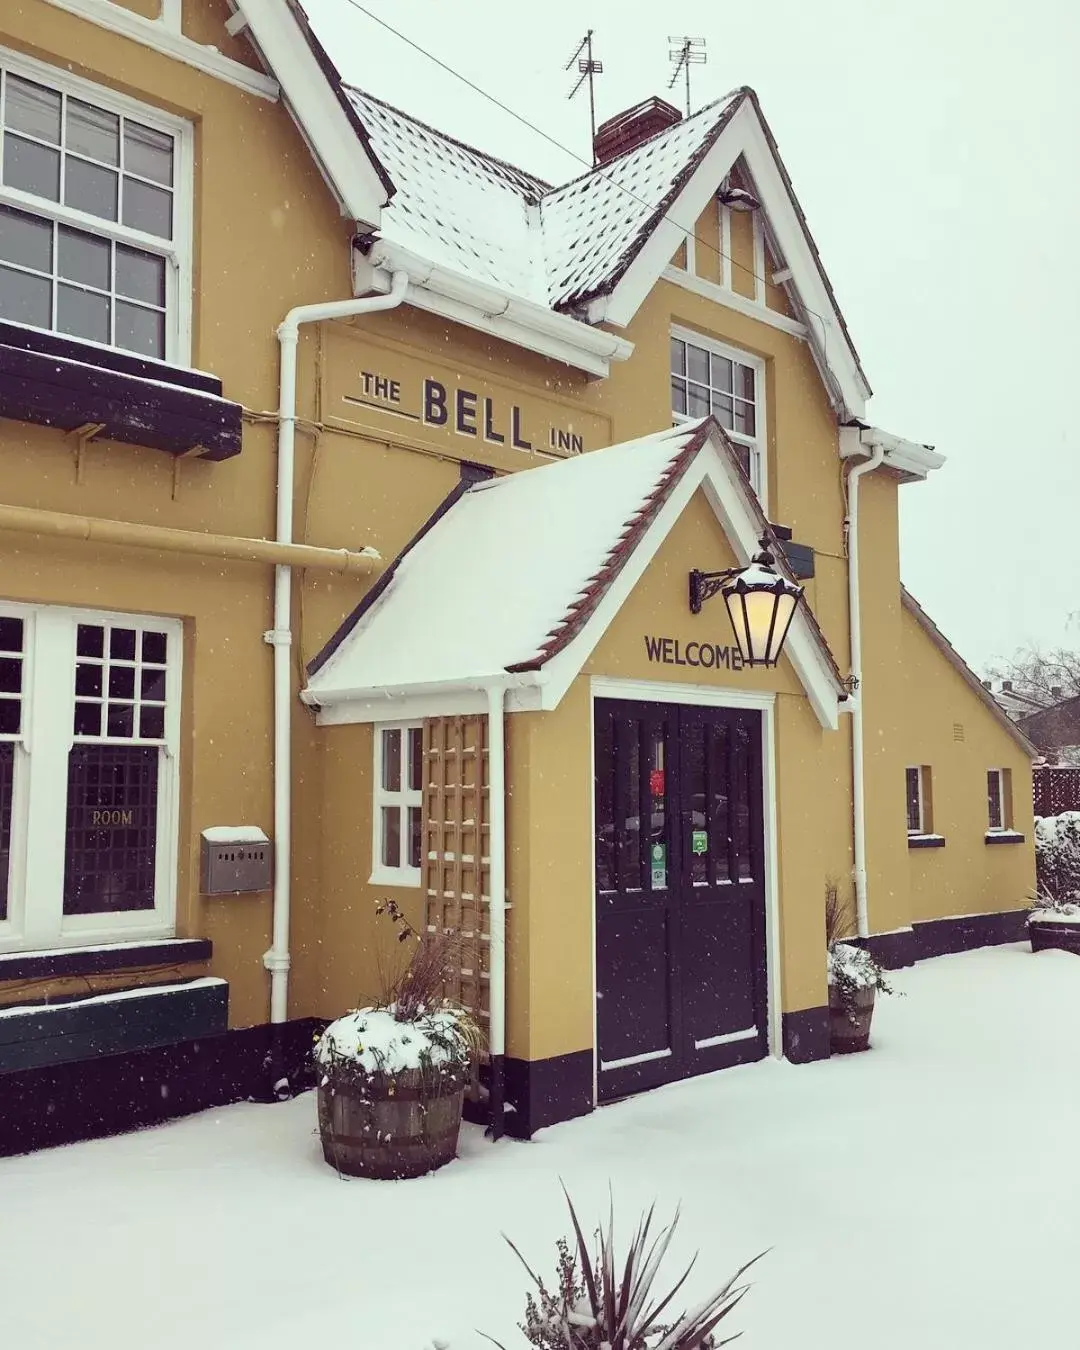 Winter in The Bell at Old Sodbury